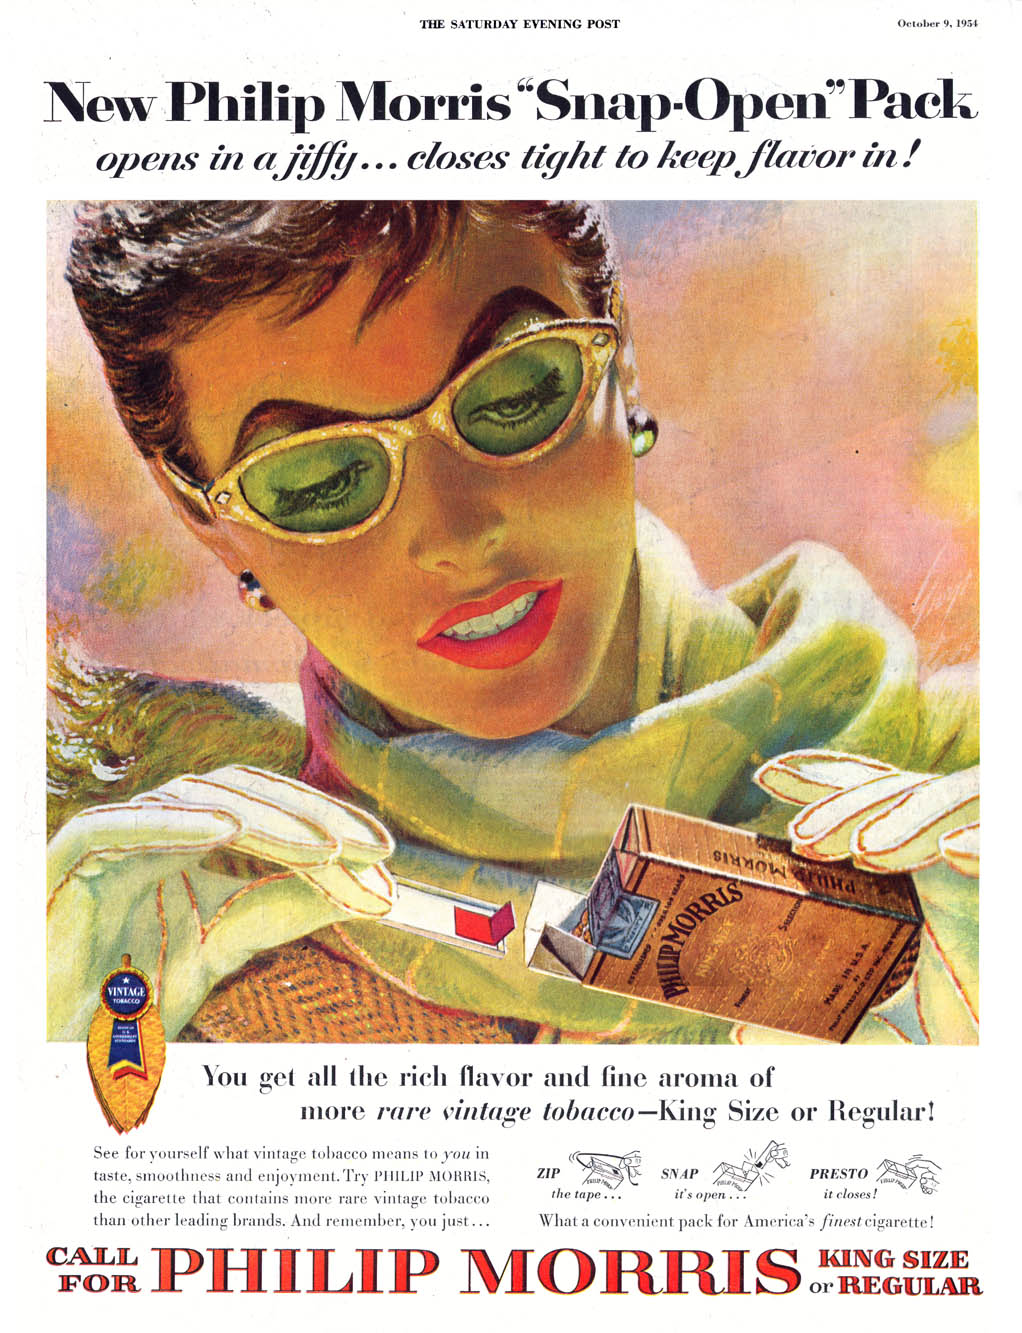 Phillip Morris - illustrated by Edwin Georgi - published in The Saturday Evening Post - October 9, 1954